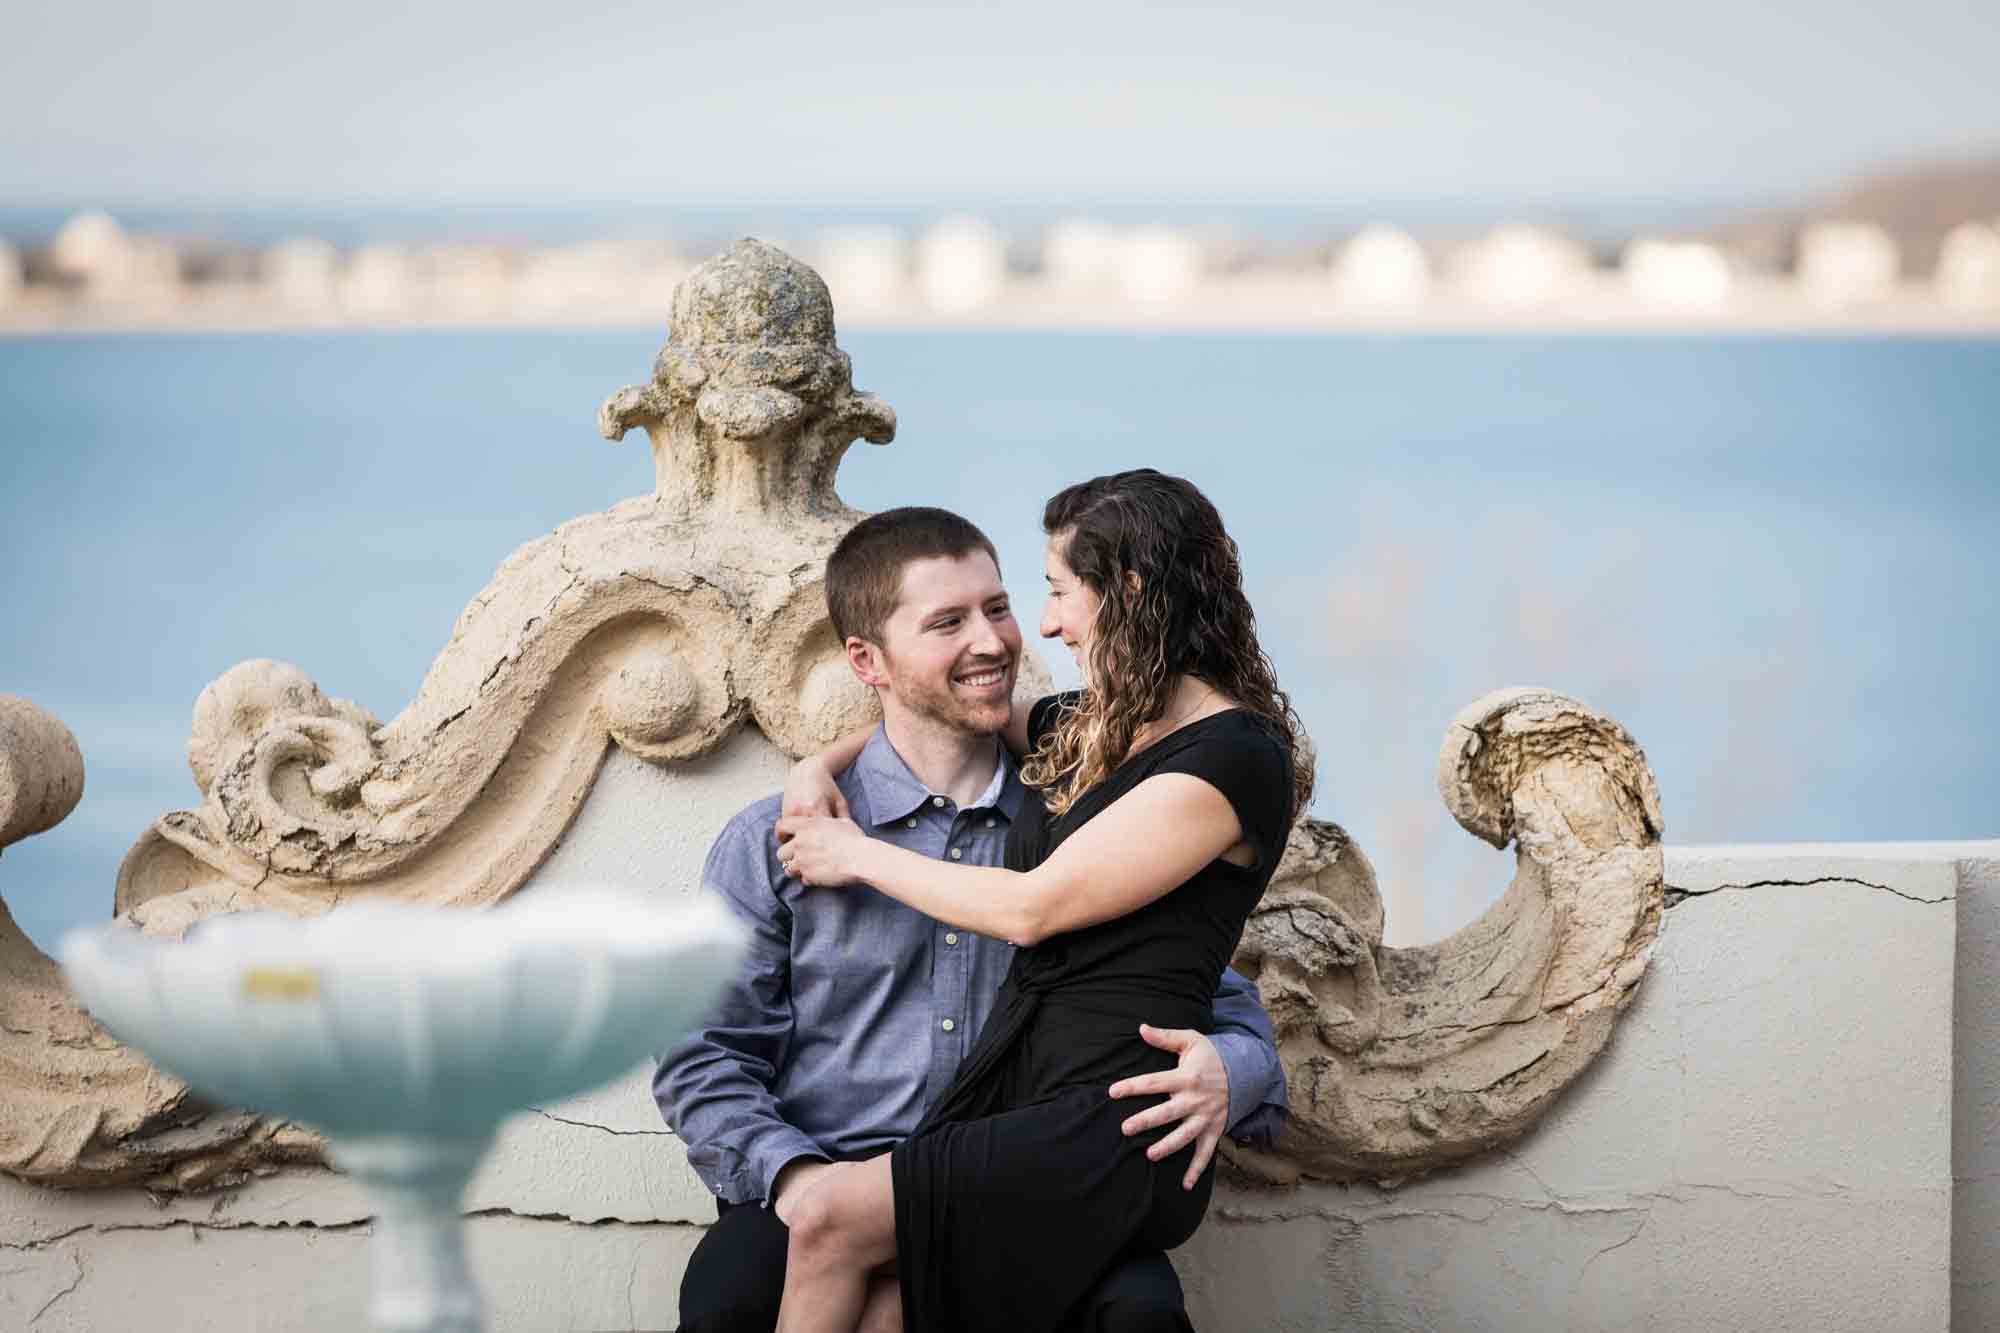 Vanderbilt Museum engagement photo of woman sitting on man's lap with Northport Bay in background